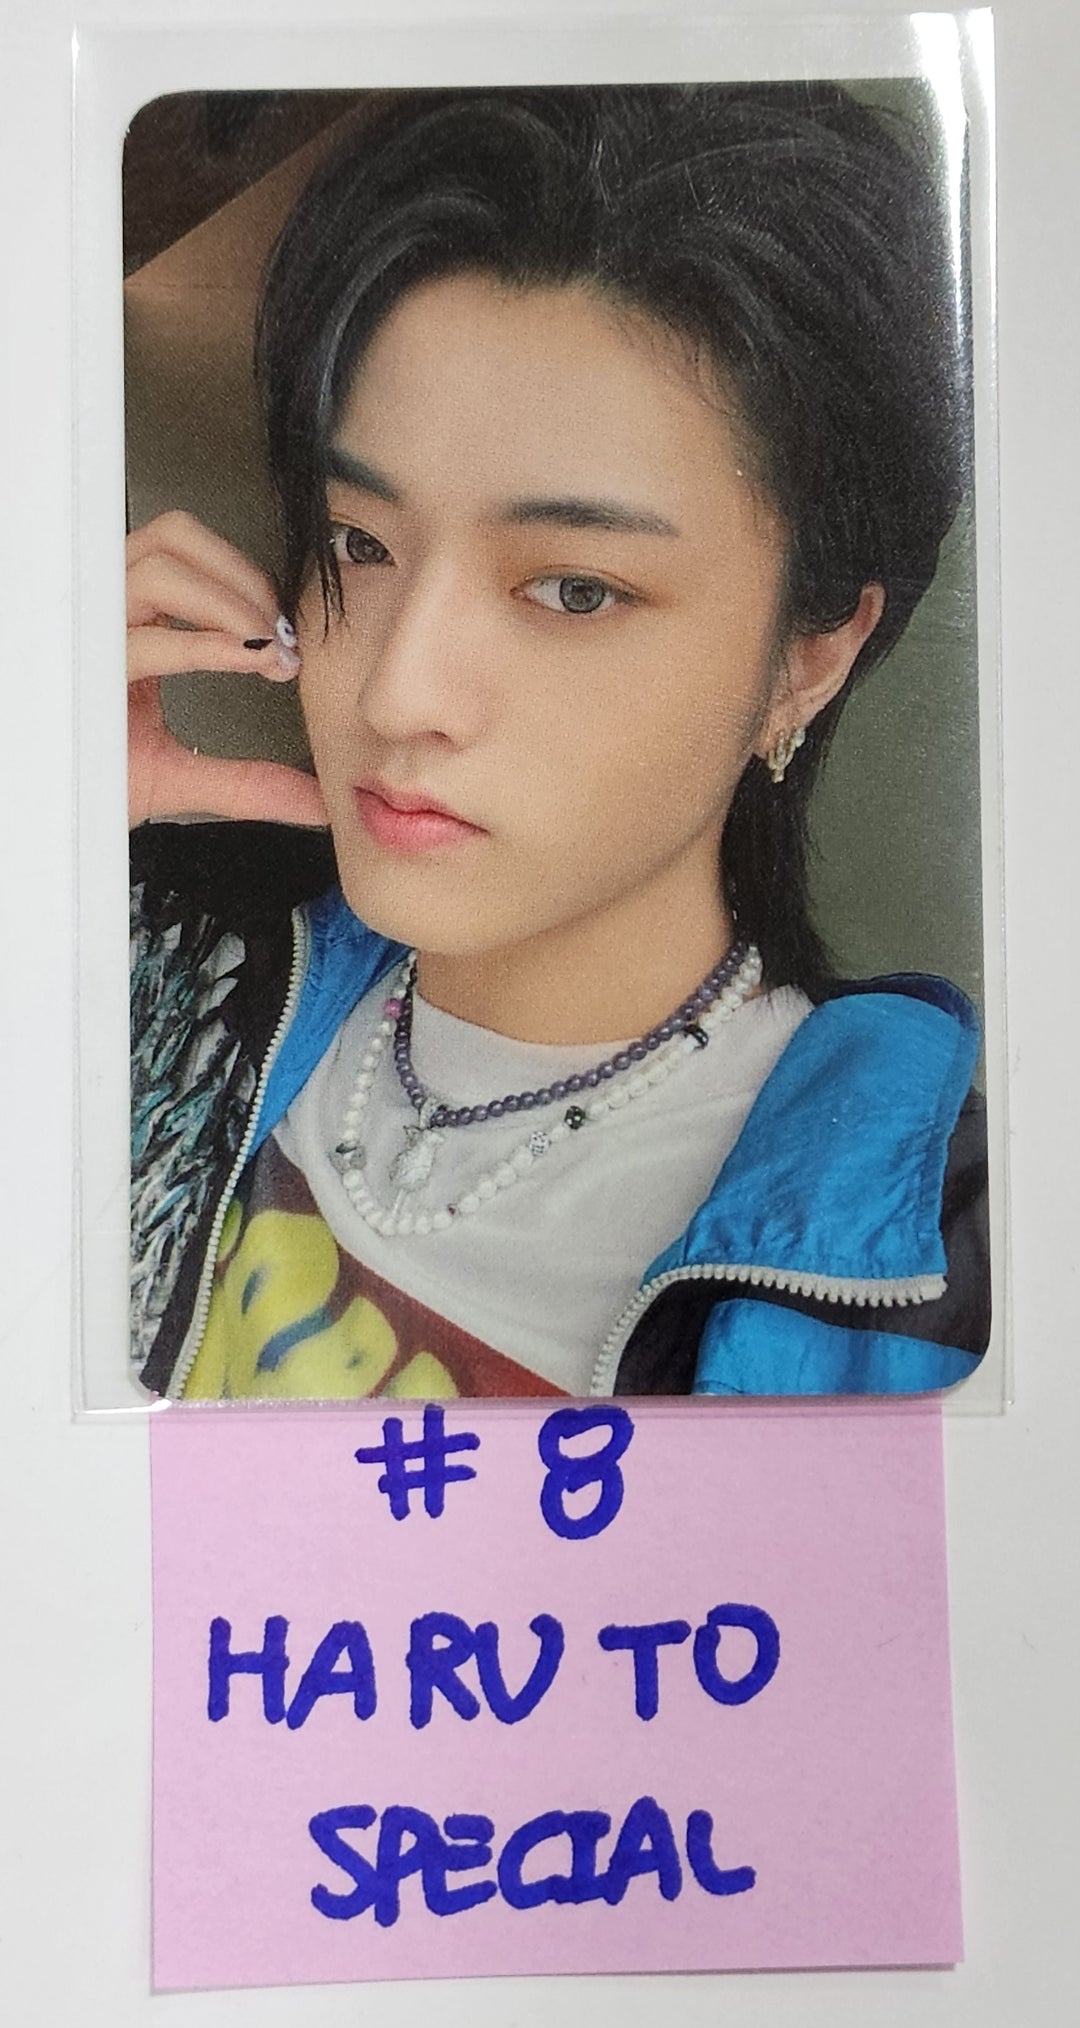 Treasure 'THE SECOND STEP : CHAPTER TWO' - Ktown4U Special Beverage Photocard